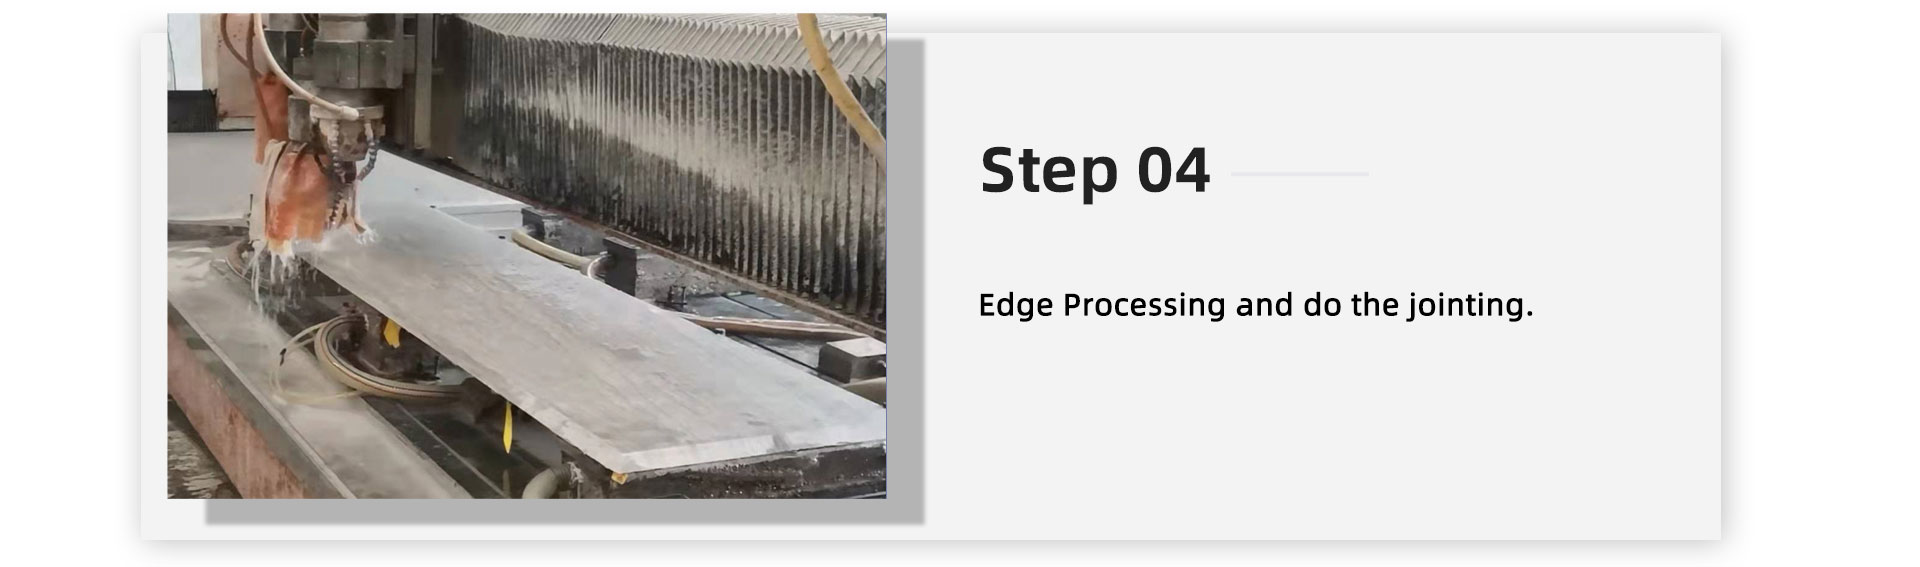 Edge Processing and do the jointing.